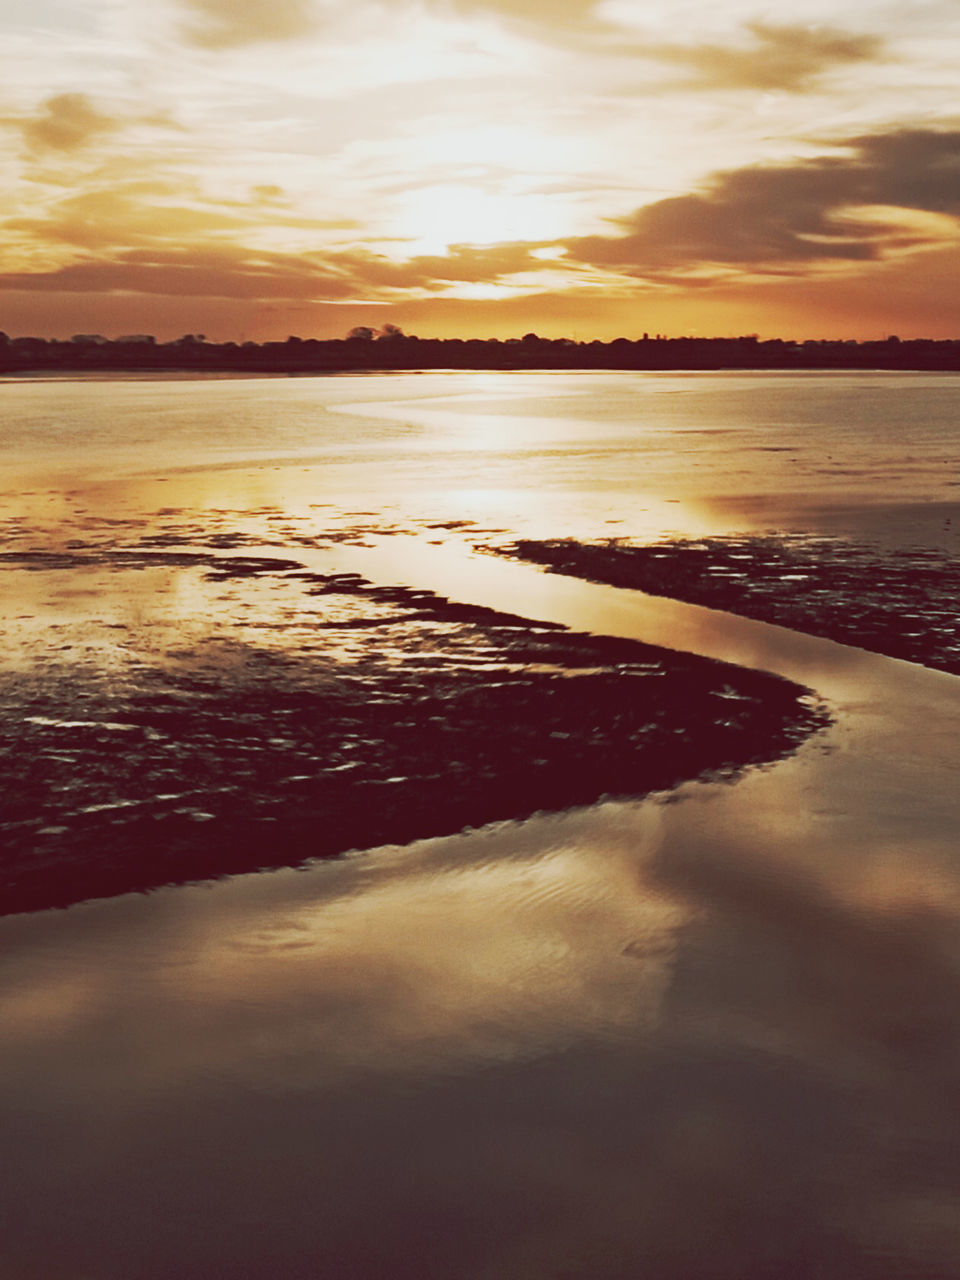 water, sky, sunset, reflection, sea, beauty in nature, cloud, scenics - nature, tranquility, nature, tranquil scene, land, dawn, beach, no people, sunlight, ocean, shore, horizon, idyllic, coast, wave, dramatic sky, environment, outdoors, evening, orange color, horizon over water, landscape, sun, travel destinations